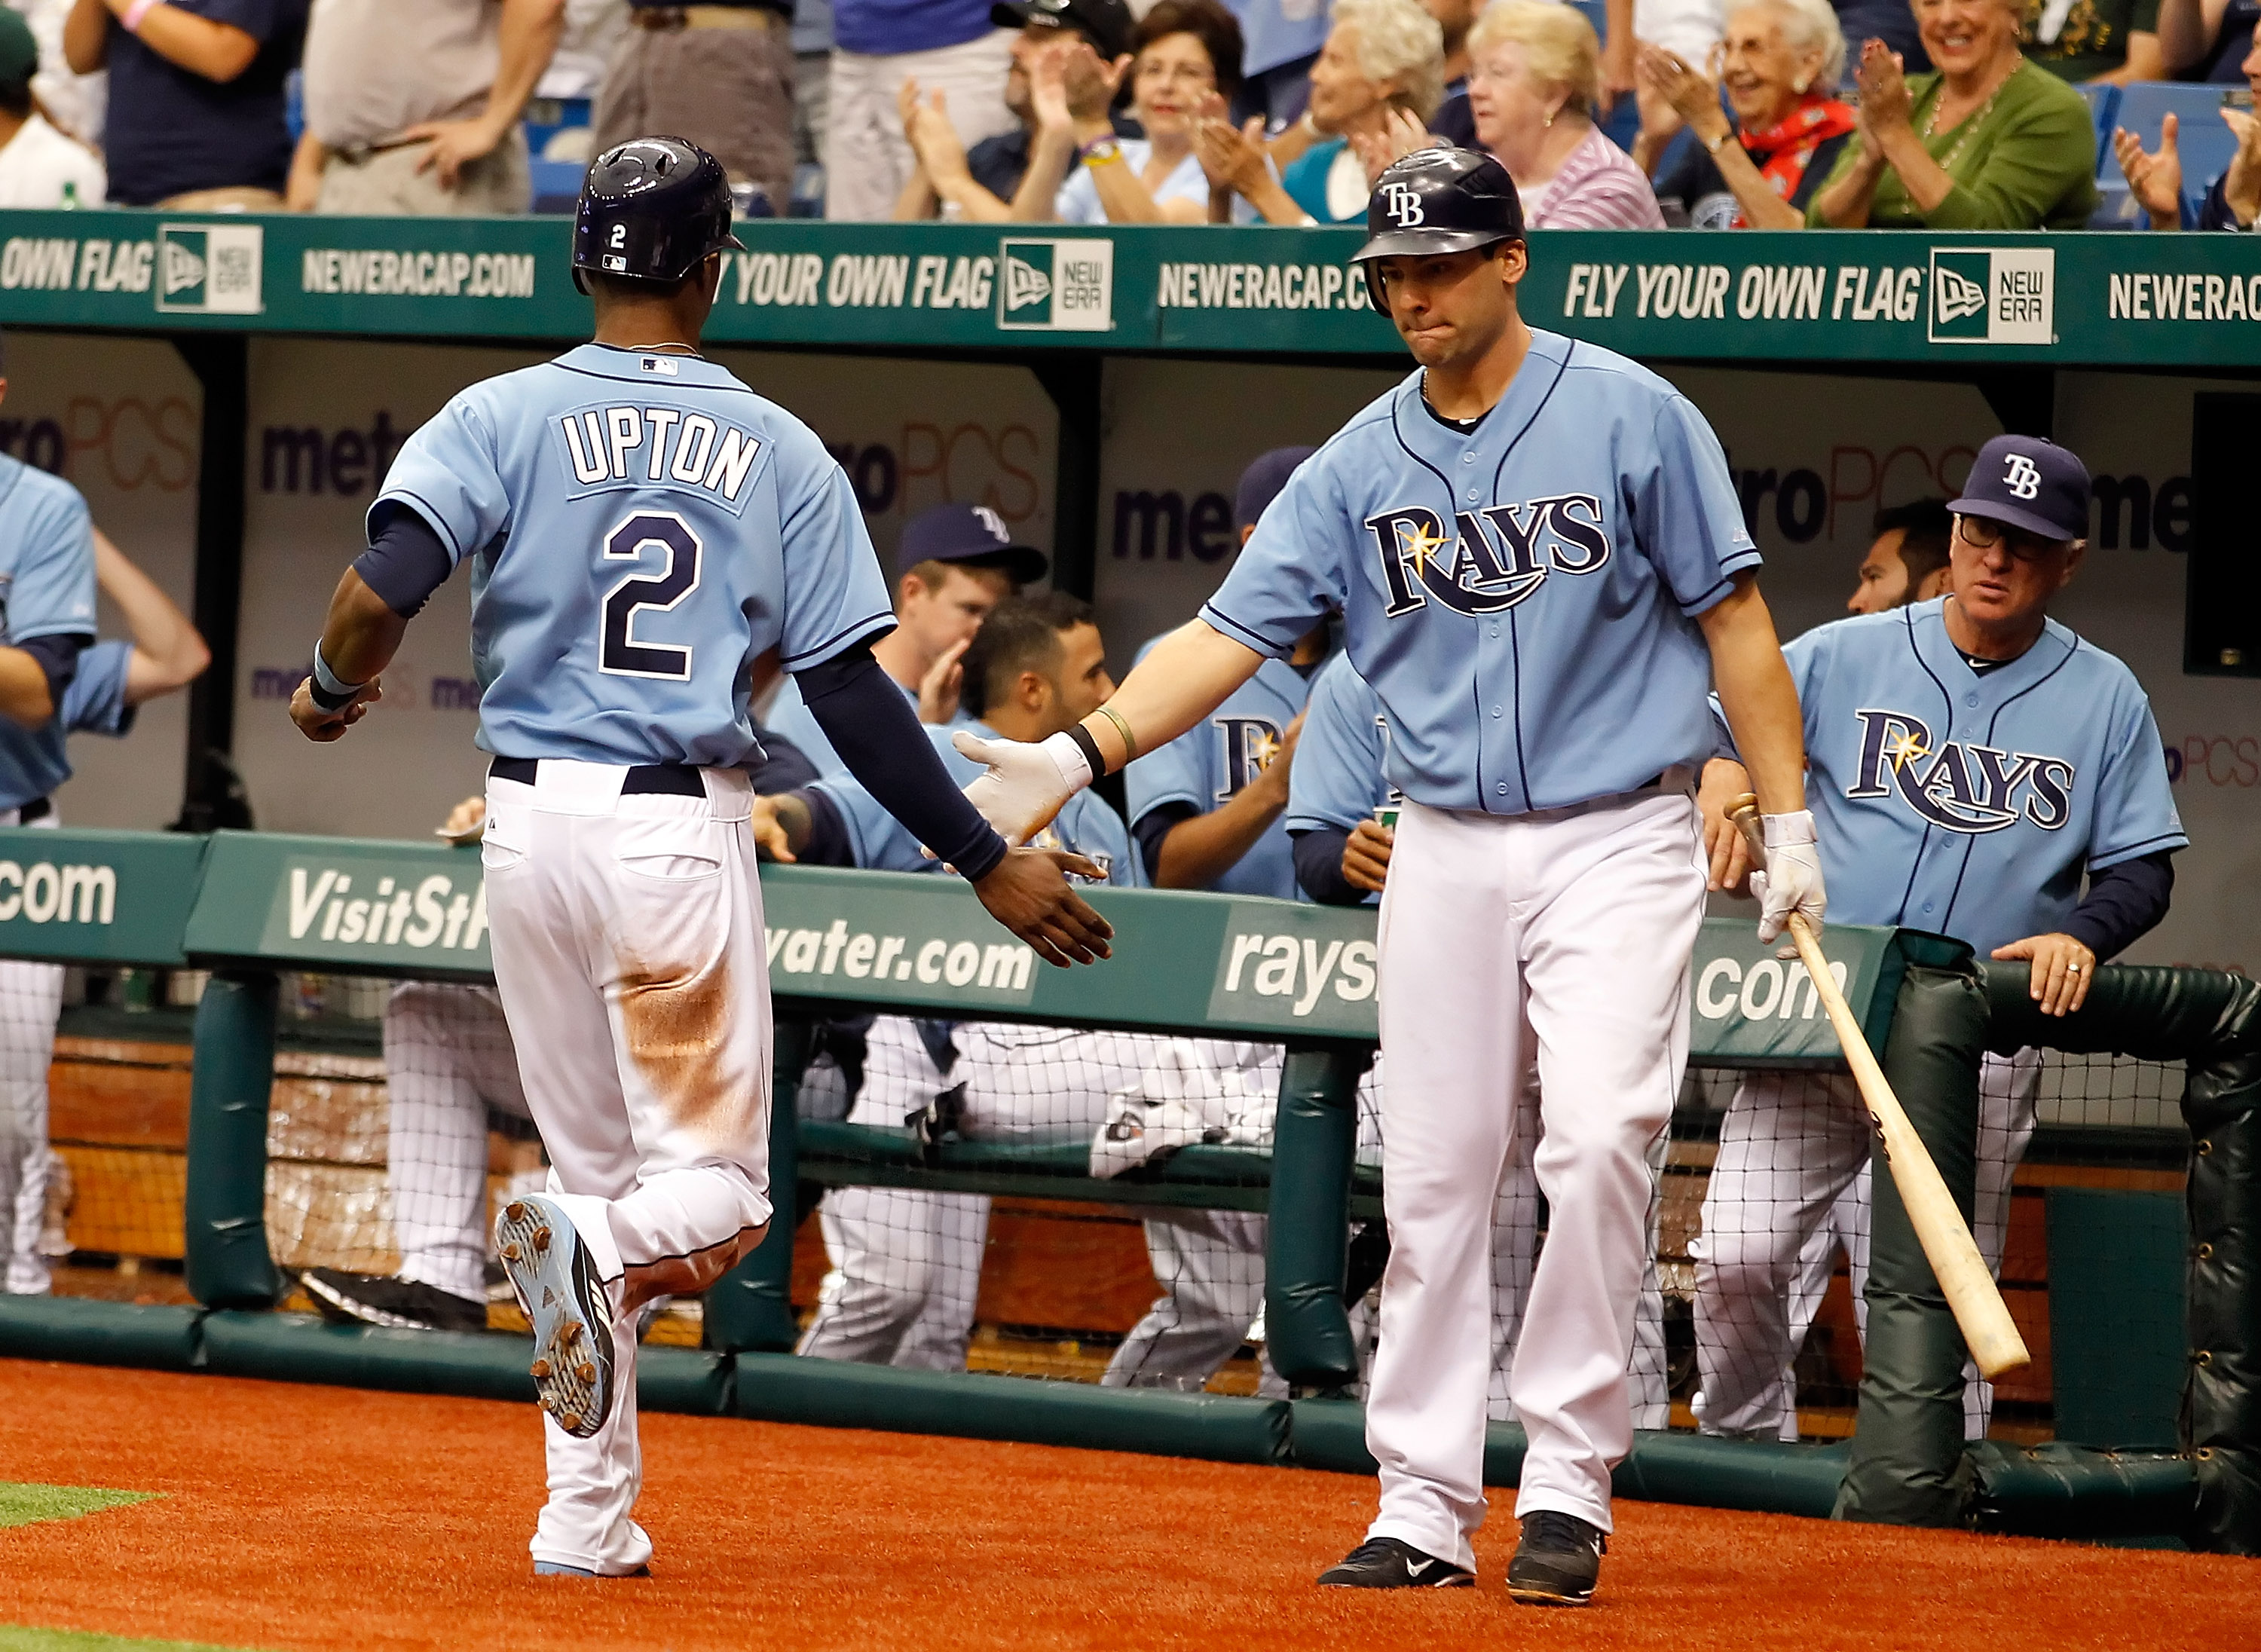 ST. PETERSBURG, FL - MAY 01:  Outfielder B.J. Upton #2 of the Tampa Bay Rays is congratulated by Casey Kotchman #11 after scoring a run against the Los Angeles Angels of Anaheim during the game at Tropicana Field on May 1, 2011 in St. Petersburg, Florida.